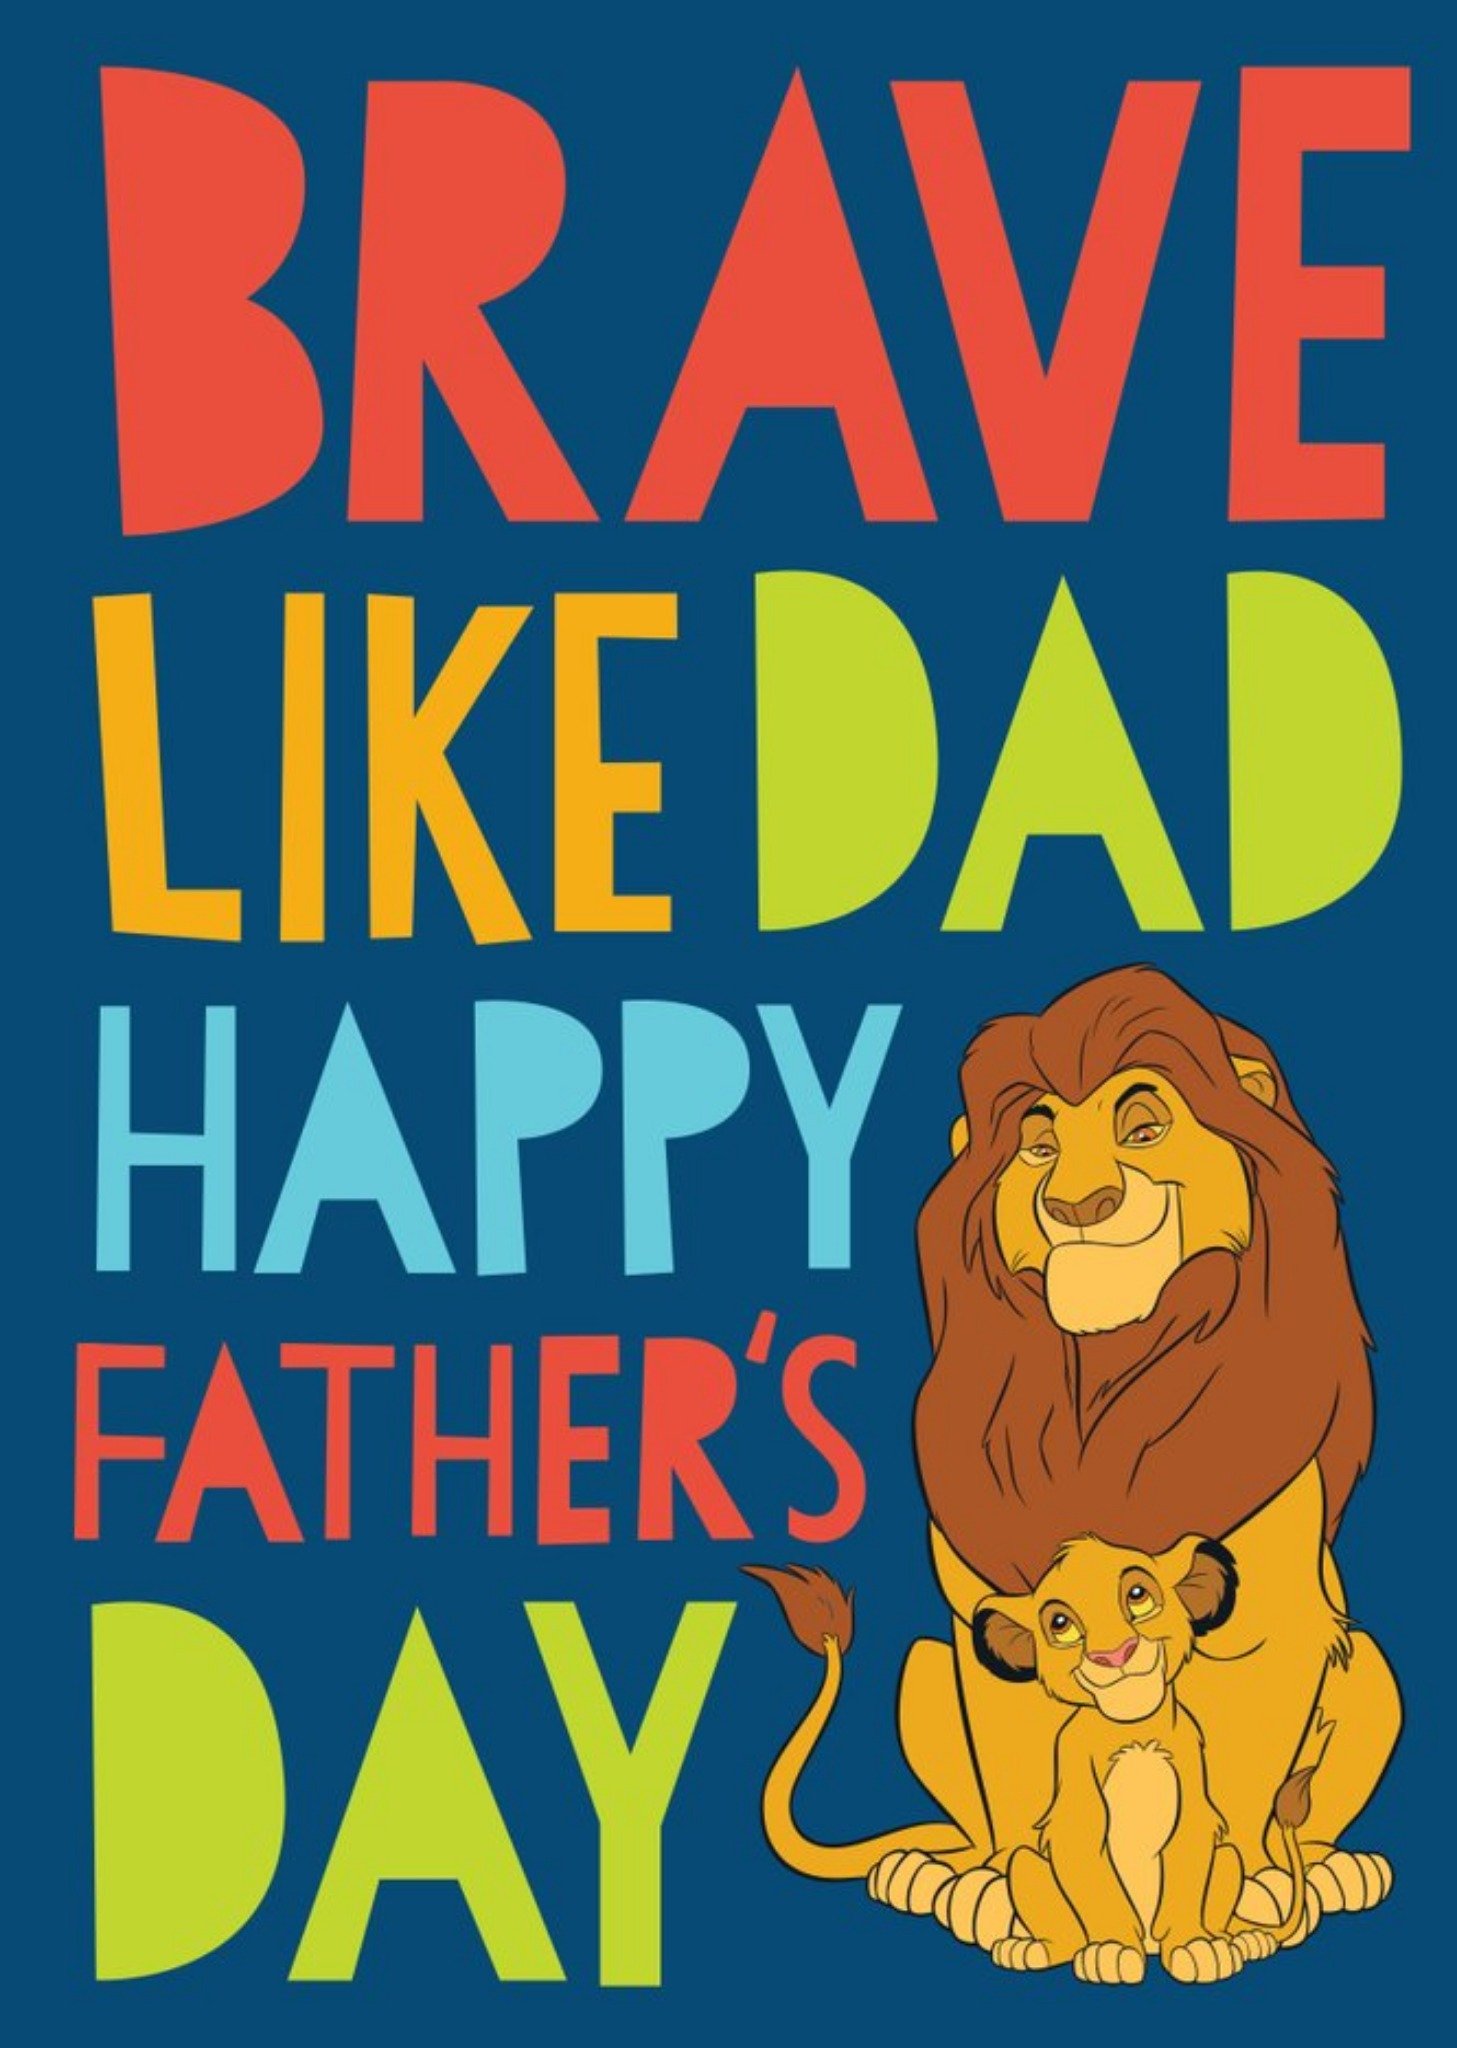 Disney The Lion King Brave Like Dad Father's Day Card, Large